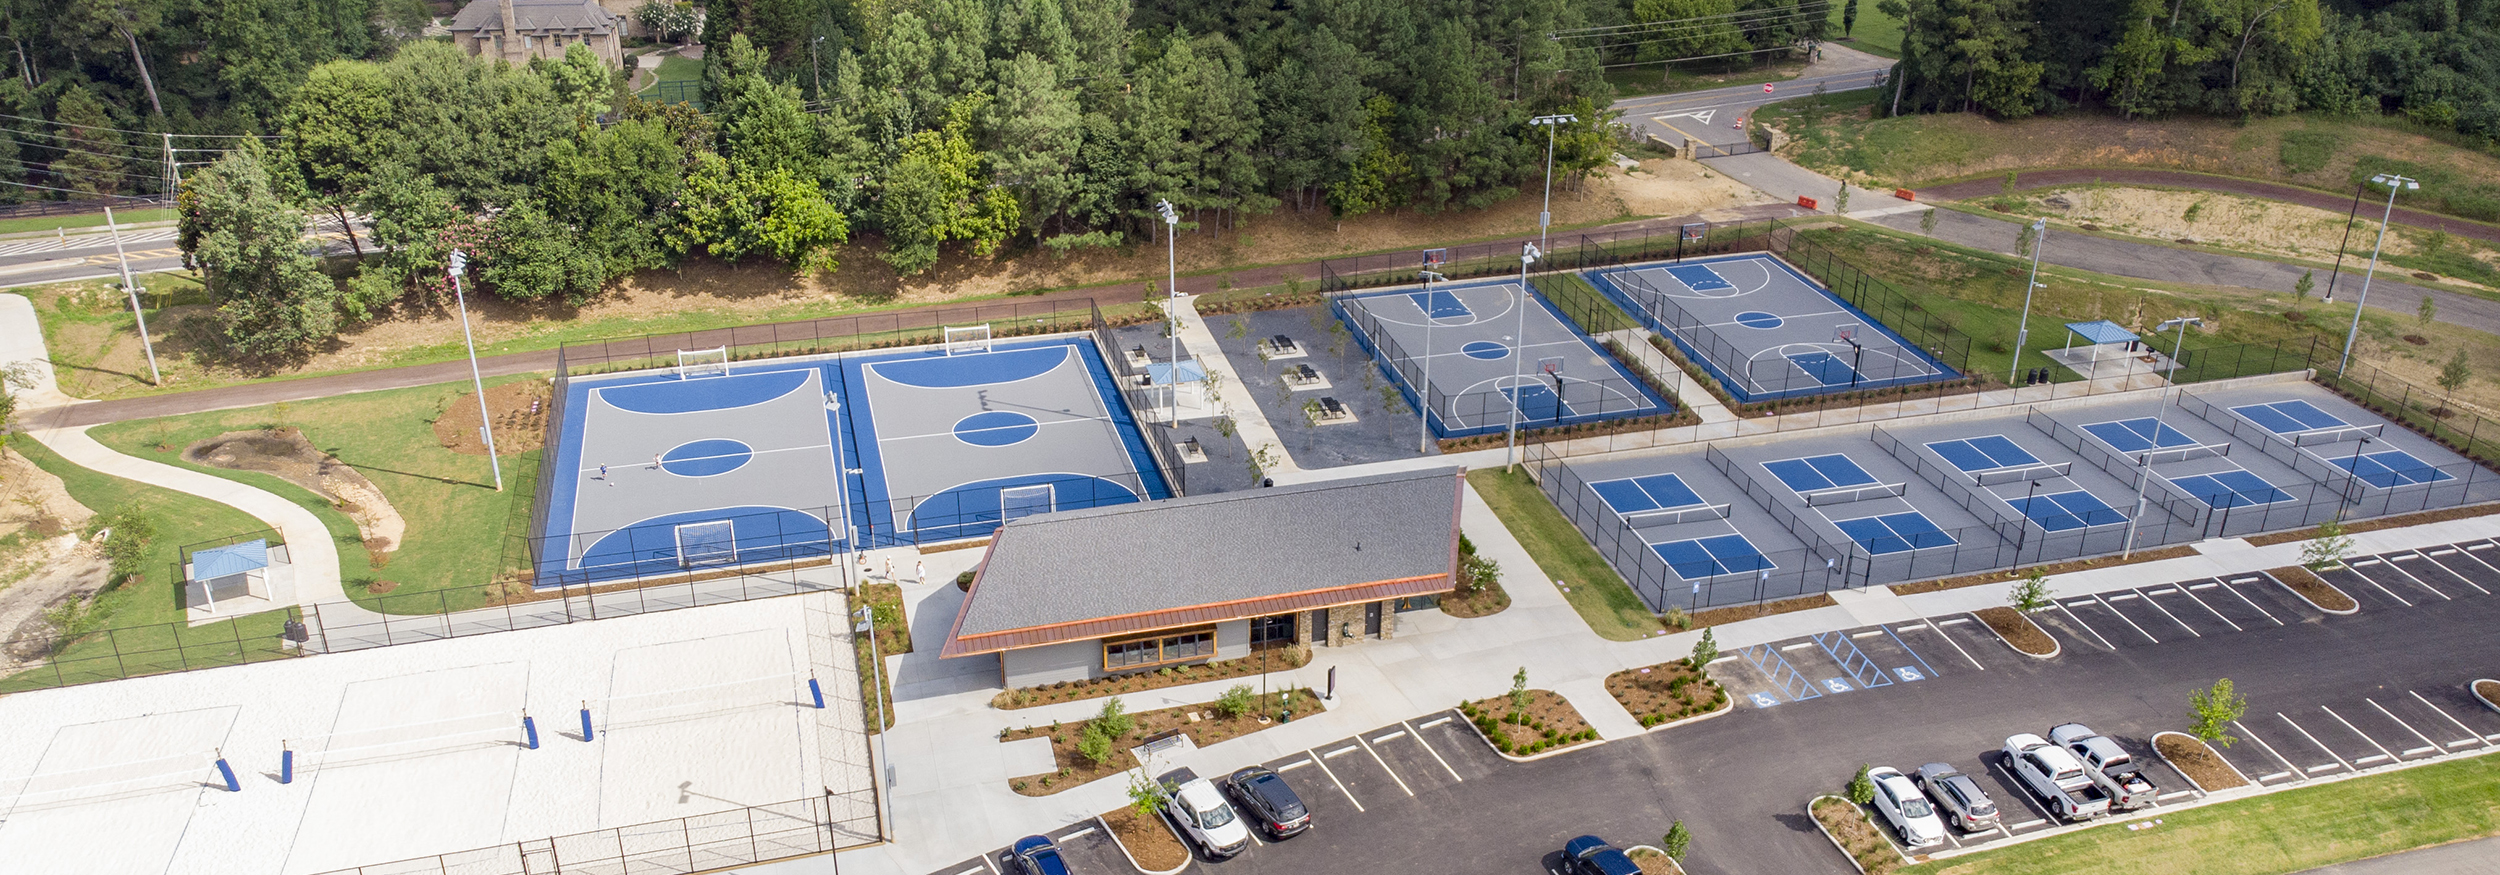 Aerial of Cauley Creek Park courts